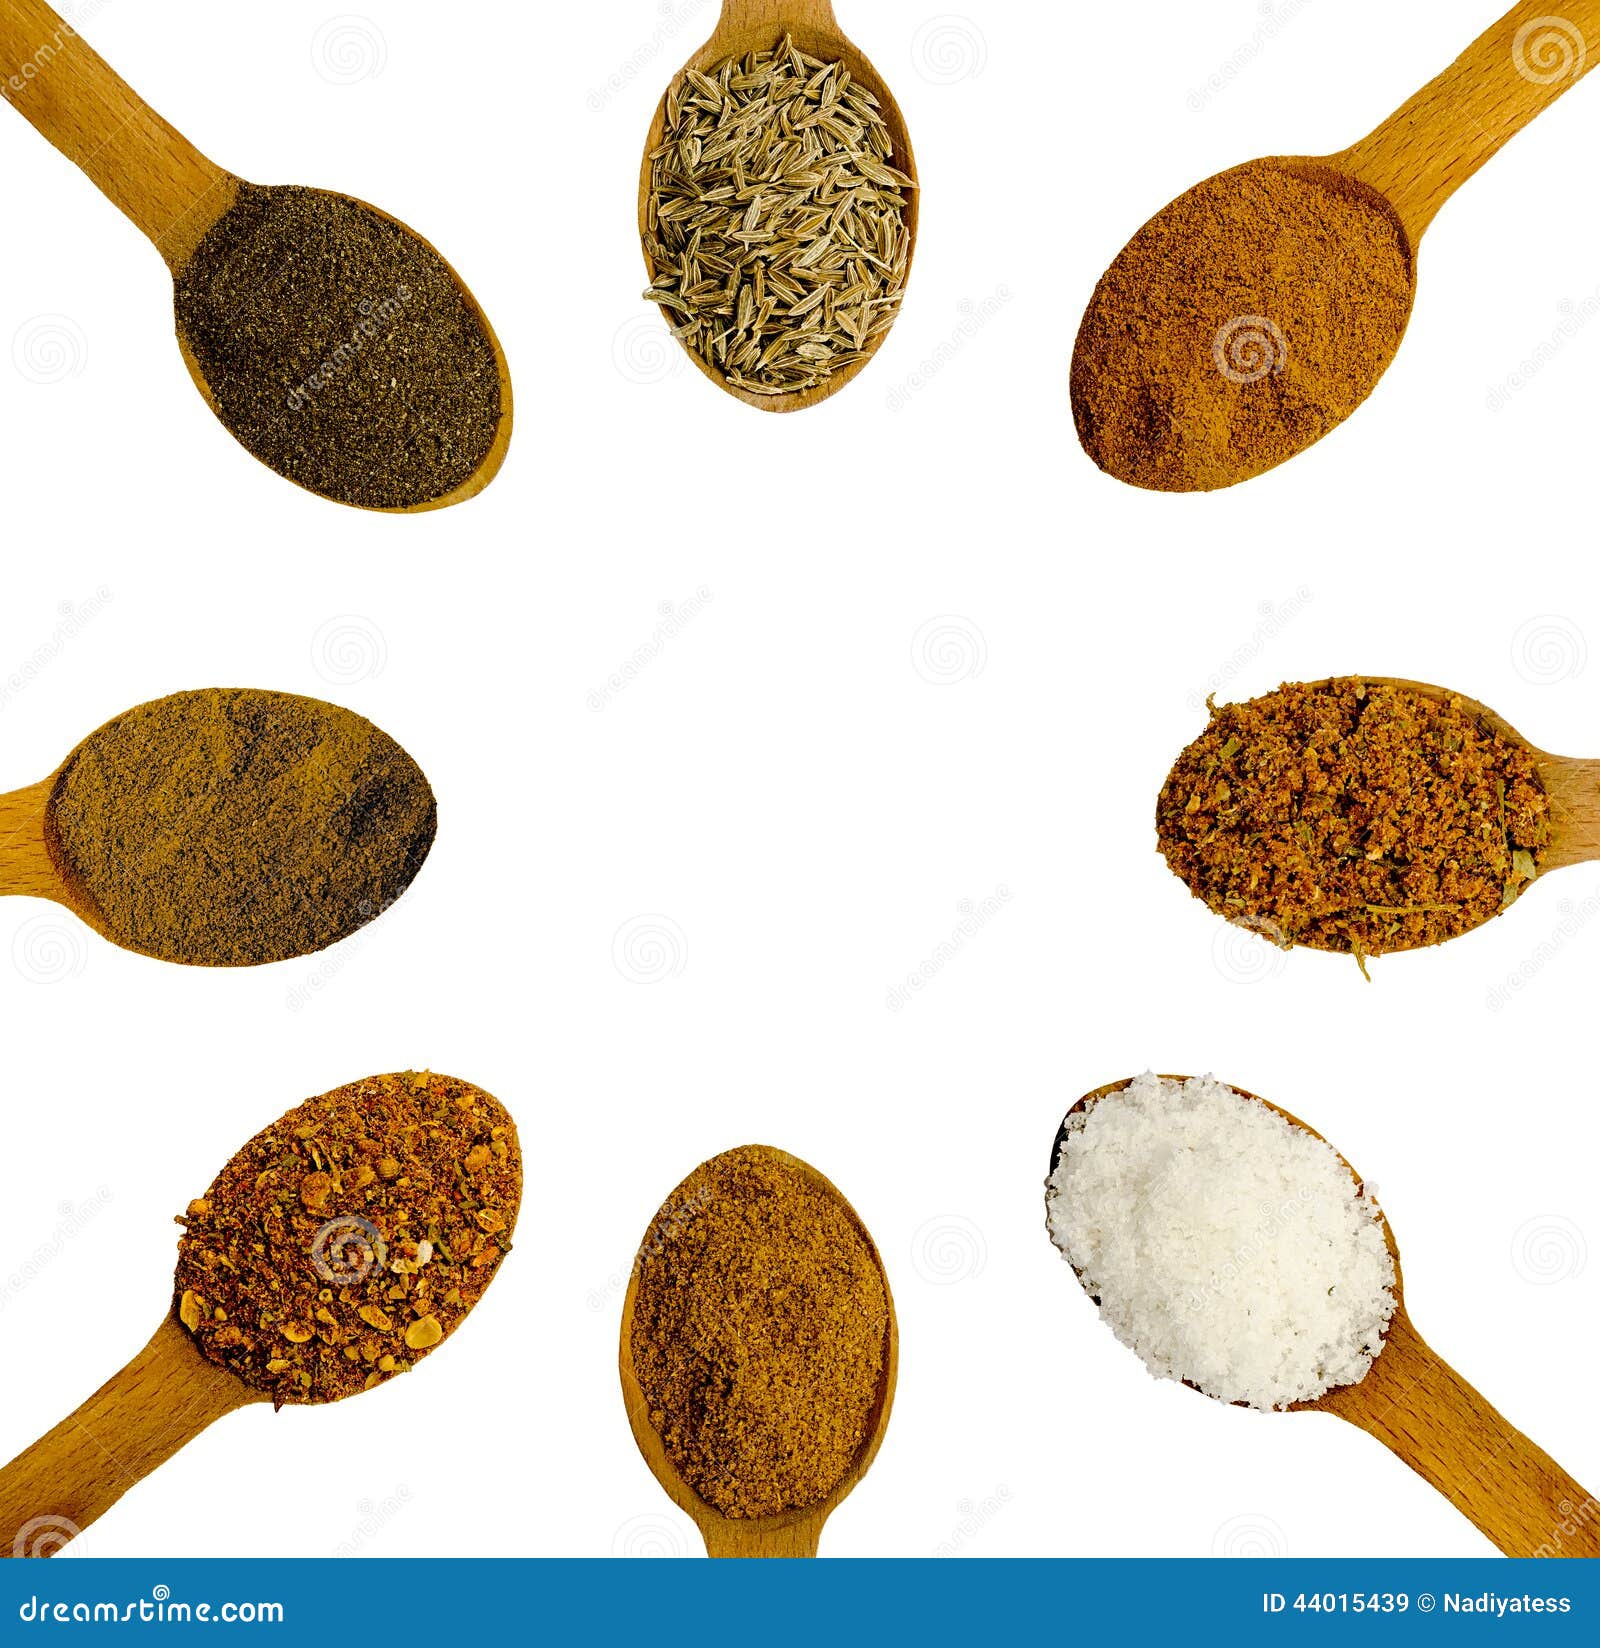 https://thumbs.dreamstime.com/z/wooden-spoons-spices-different-white-background-44015439.jpg